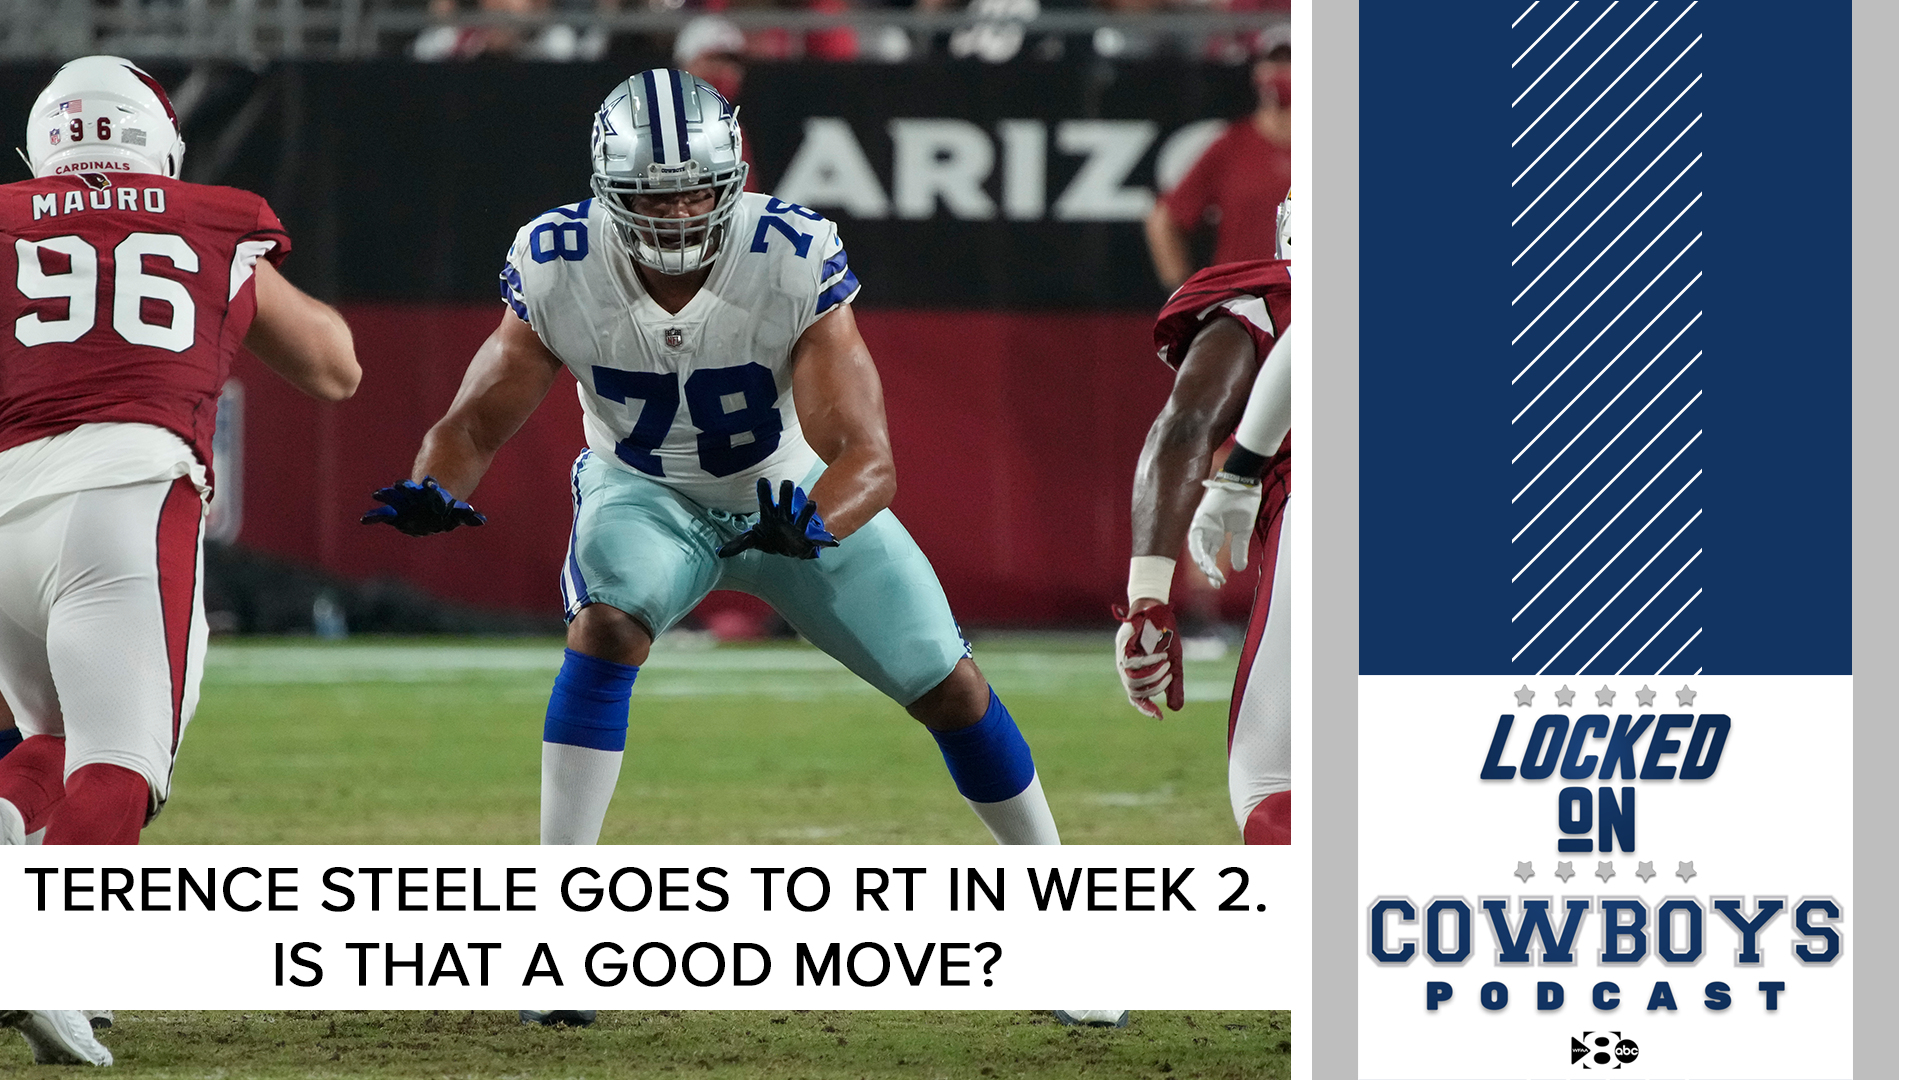 Jerry Jones announced that Terence Steele will will be the team's starting right tackle in Week 2. Is that a good move? @Marcus_Mosher and @McCool discuss.